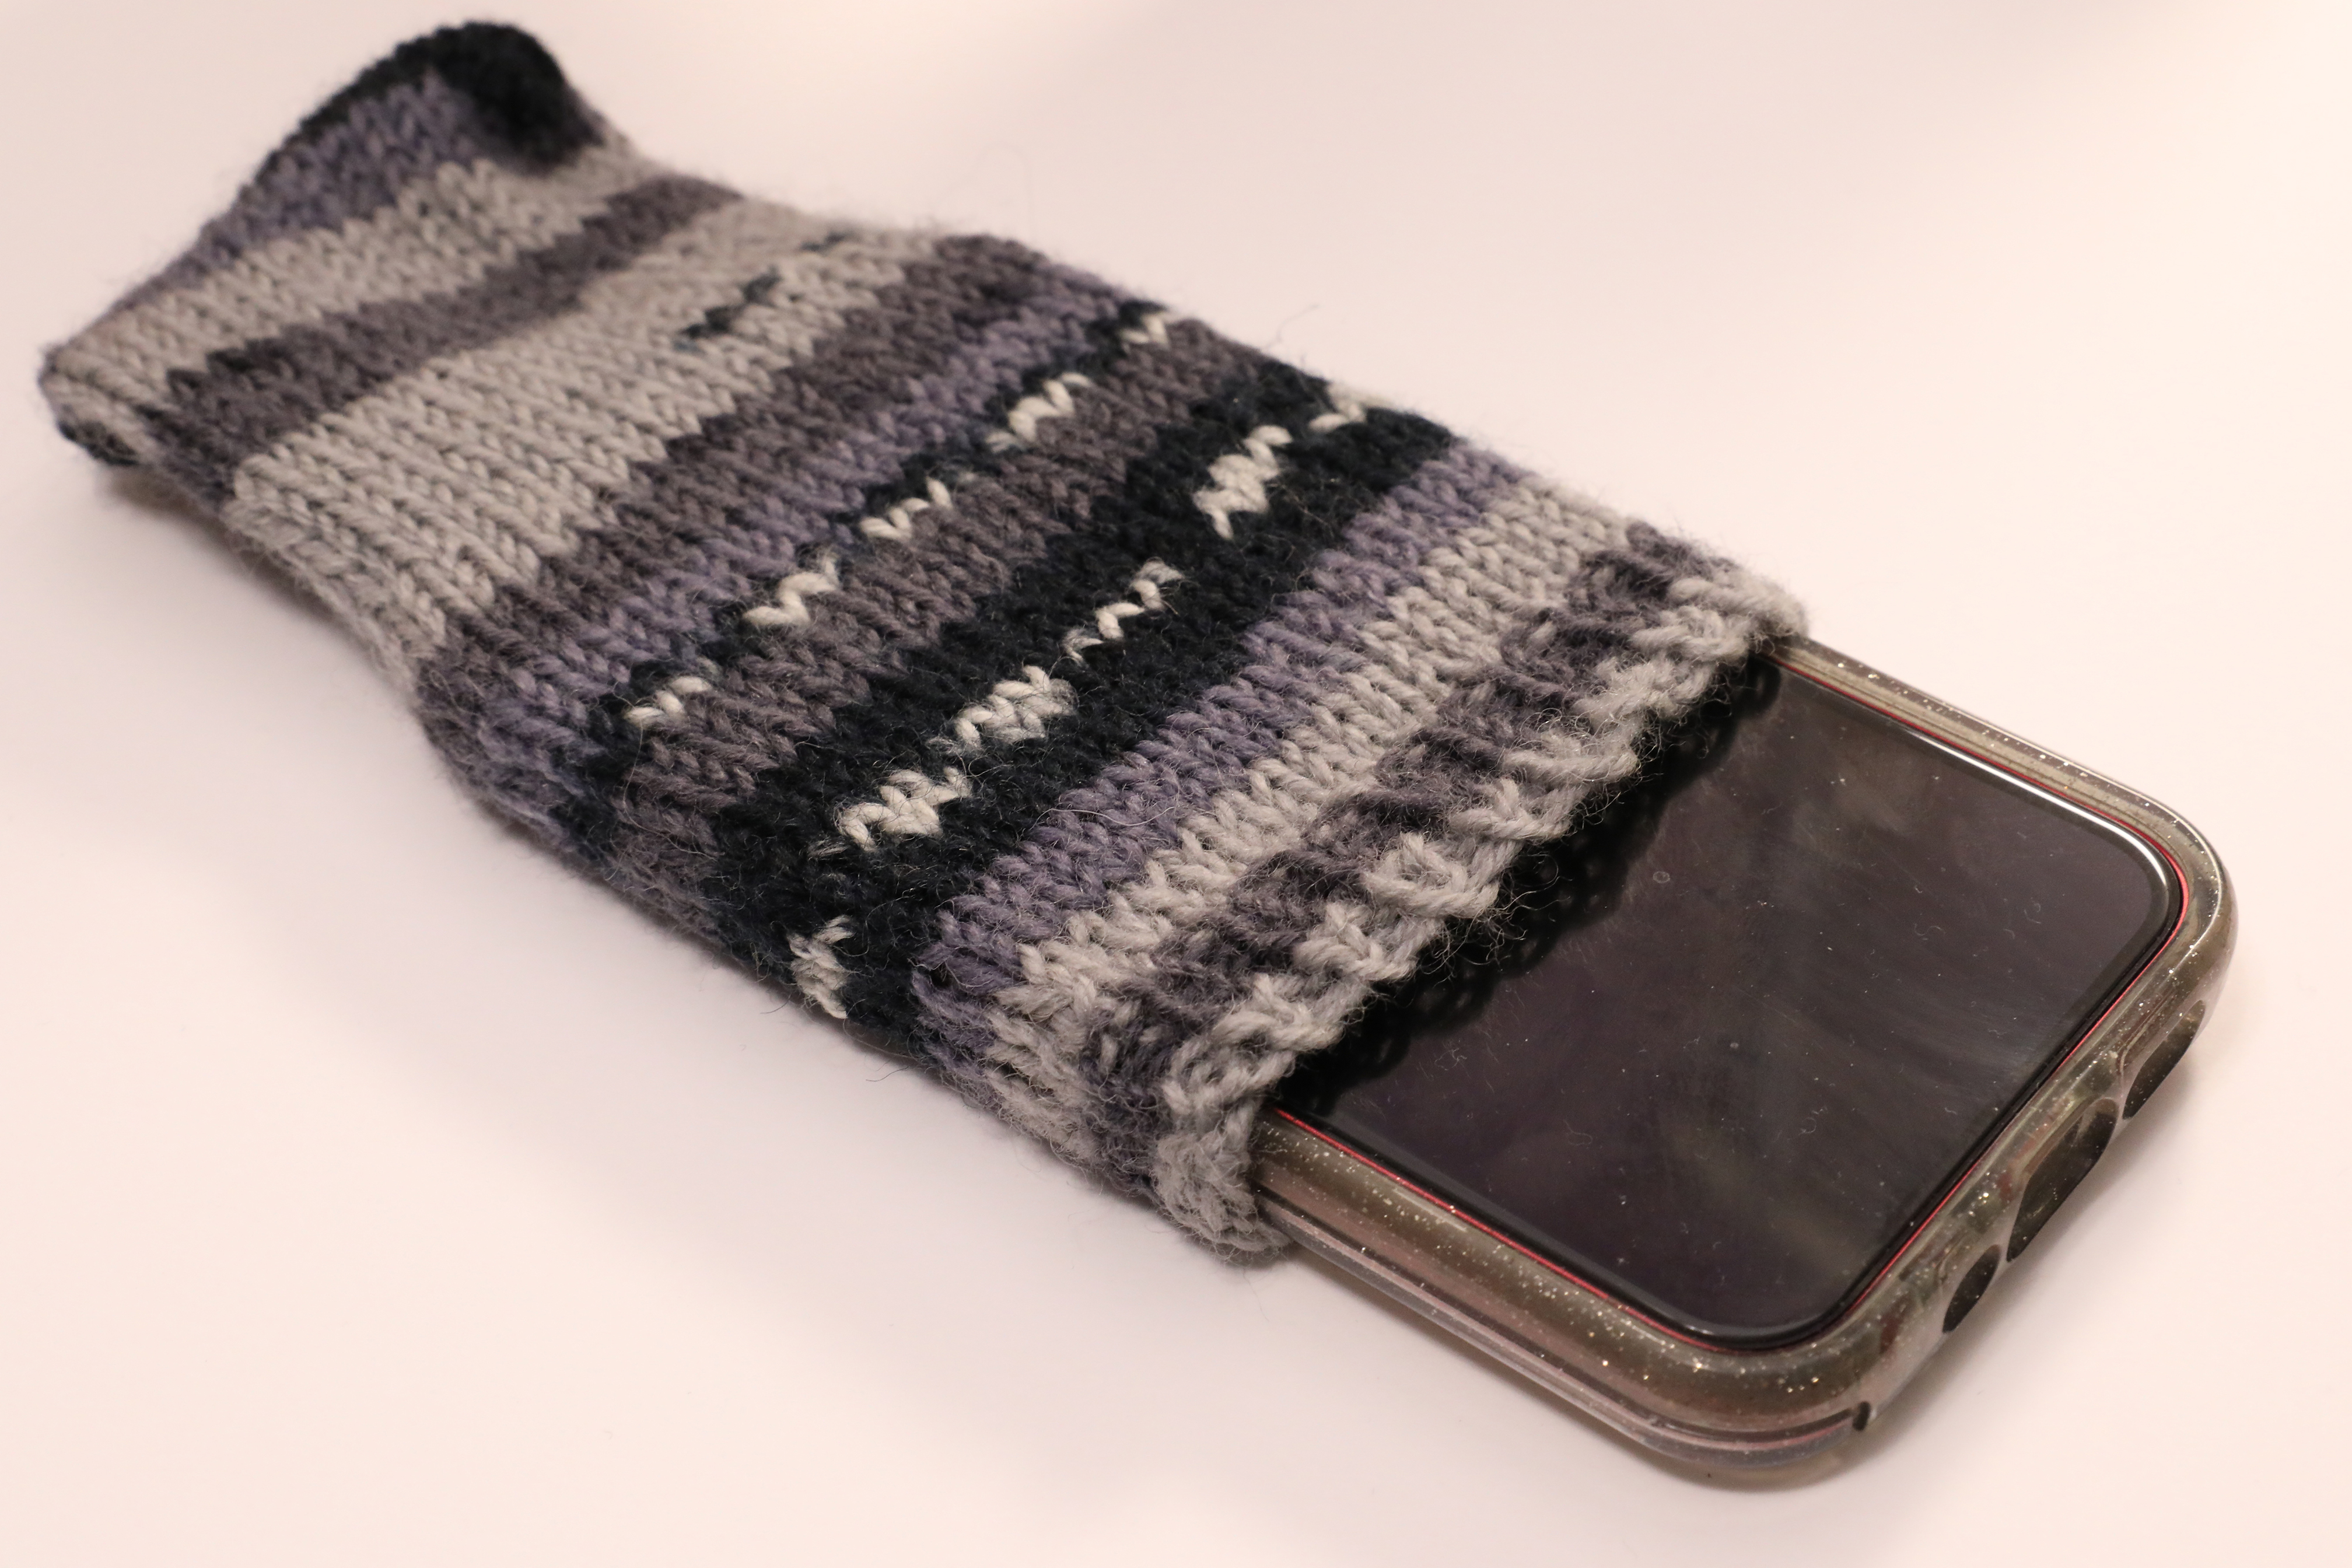 A knit, monochrome (black, white, and shades of grey) cellphone cozy on a white background. A smartphone is inside the cozy, poking out a bit on the open end.